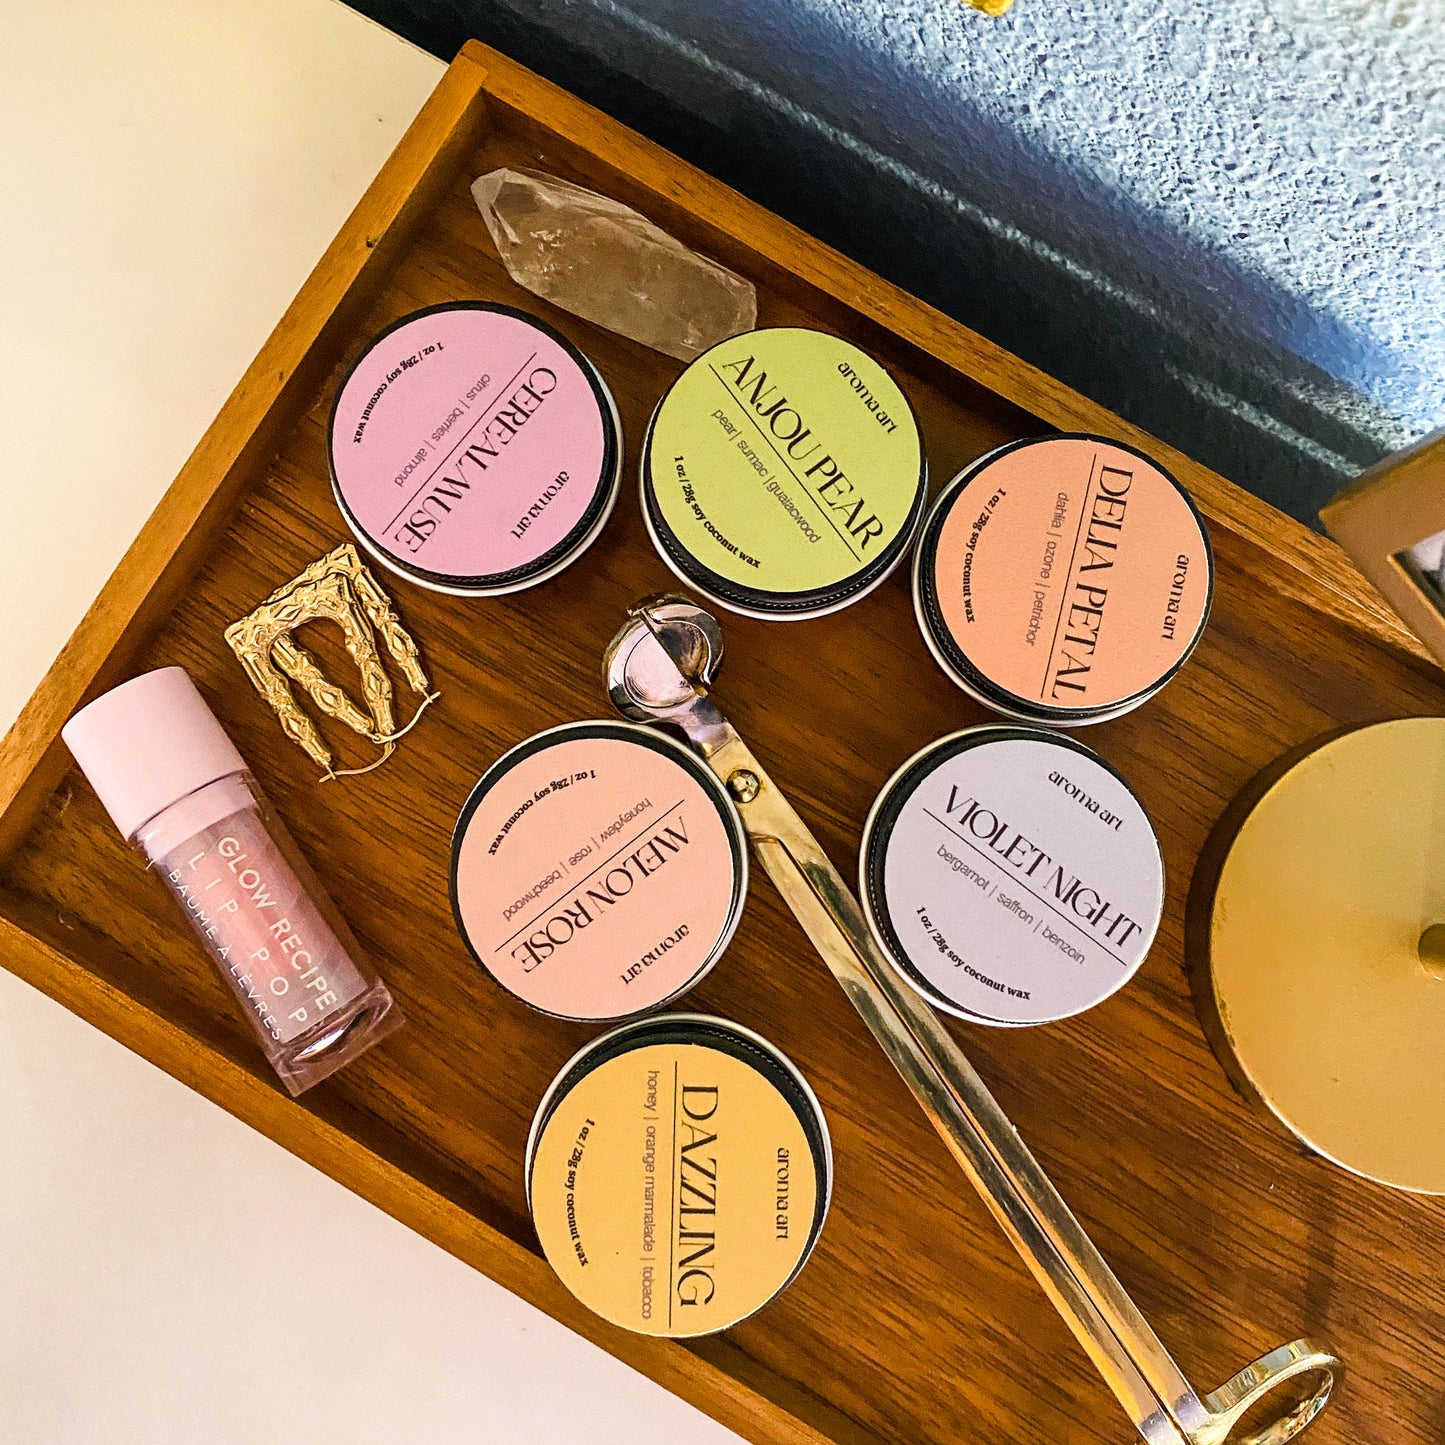 Luxuriously arranged on a wooden tray are six candles in travel size tins in a variety of scents, evoking a sense of a self-care day. The scents are (from left to right), Cereal Muse, Melon Rose, Dazzling, Anjou Pear, Delia Petal, and Violet Night.